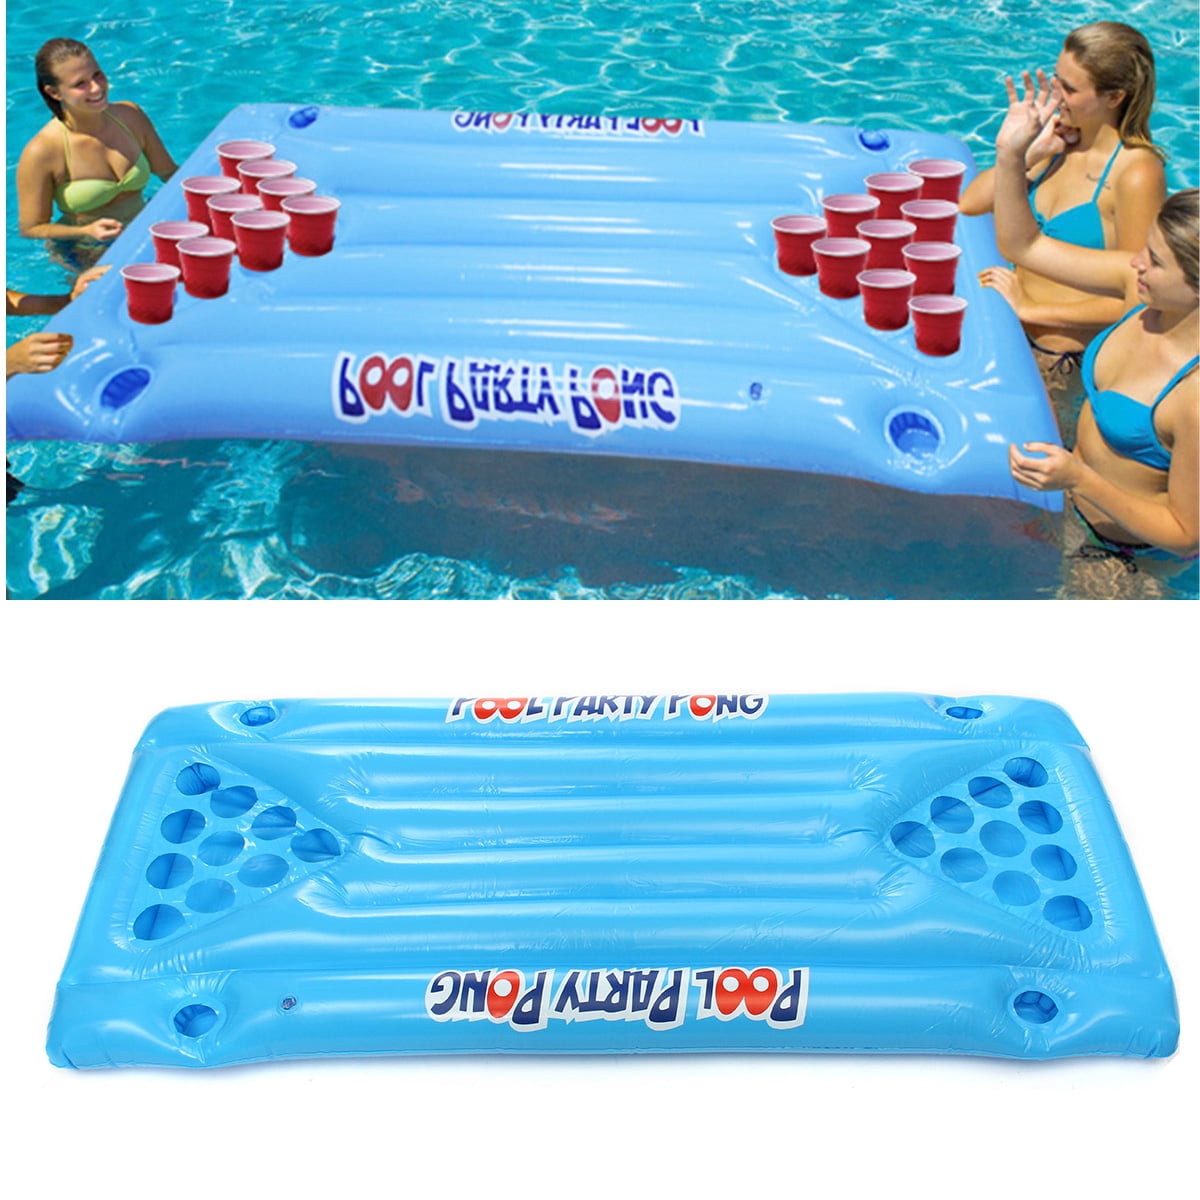 JIANYHW Inflatable Pool Pong Party Barge Float Set,Floating Pool Game Table Raft Lounger for Pool Beach Party Summer 20 Cups Blue 